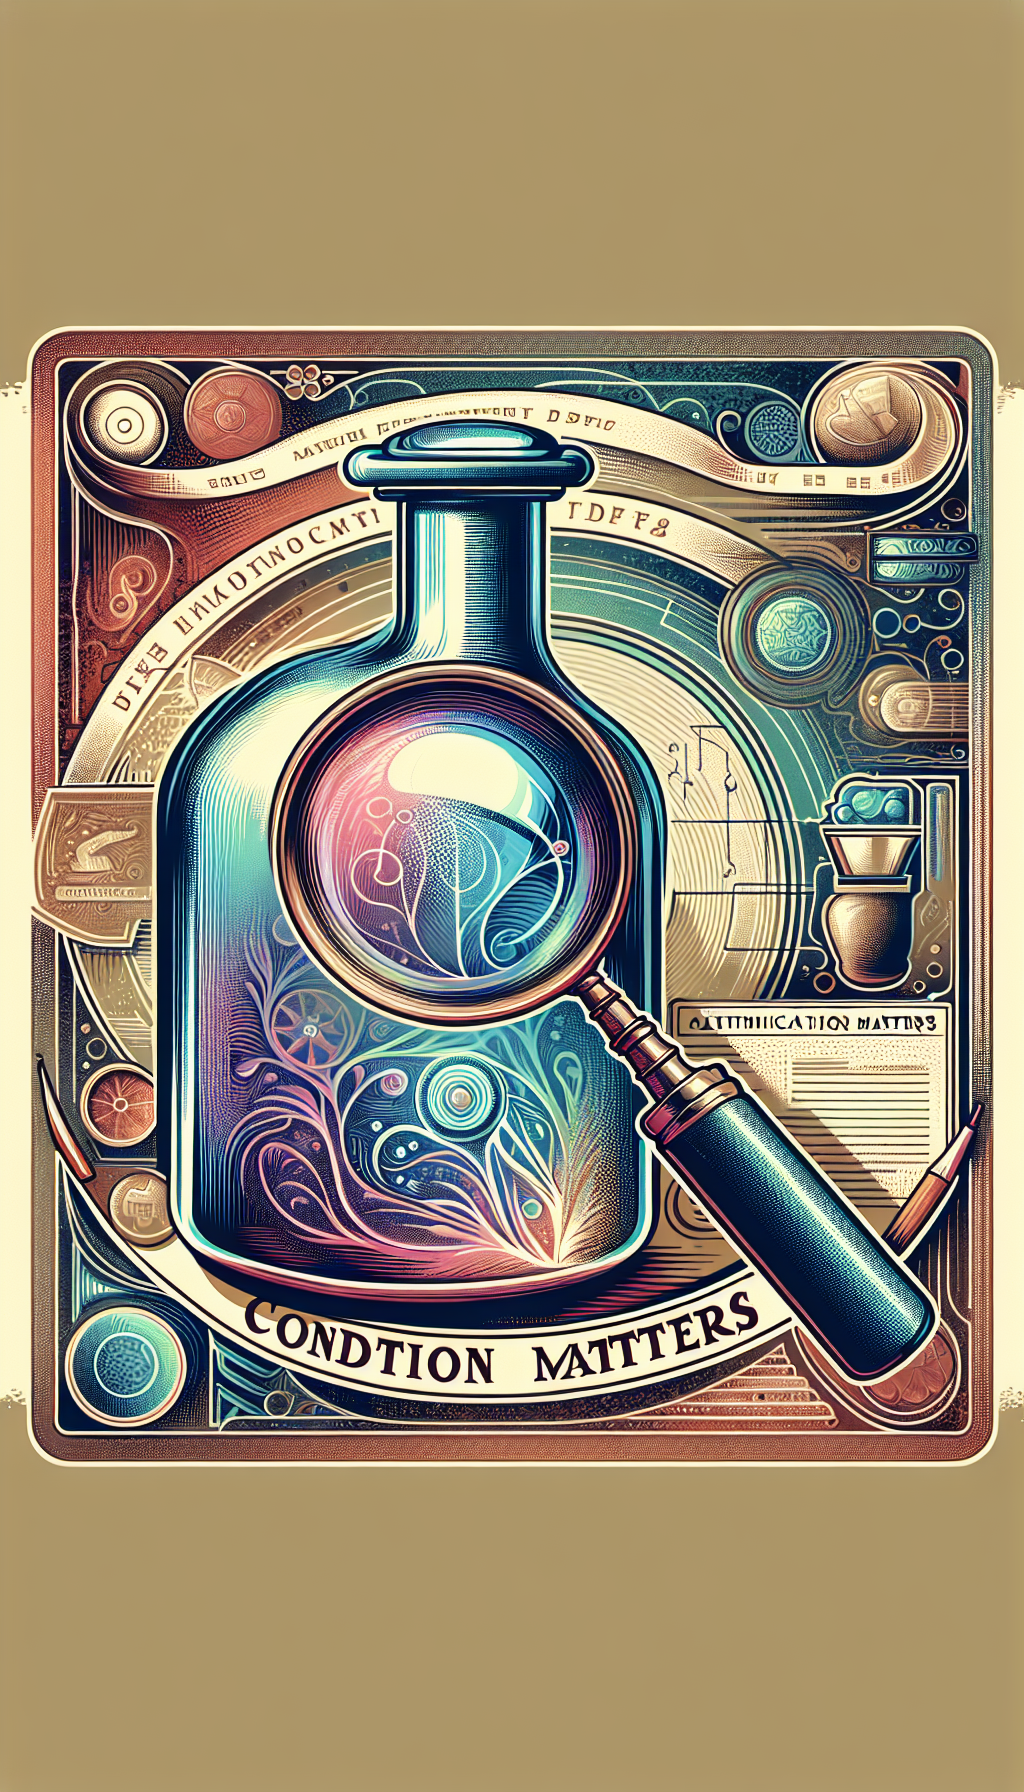 A magnifying glass hovers over a translucent, antique glass bottle revealing a spectrum of colorful, swirling history lines and minute cracks, with authentication stamps floating nearby. The magnifying glass, part Sherlock chic, part vintage etching, contrasts against a hyper-realistic Victorian backdrop, while Art Deco-style text "Condition Matters" arcs overhead, in cameo silhouette, hinting at the era's distinct glass craftsmanship.